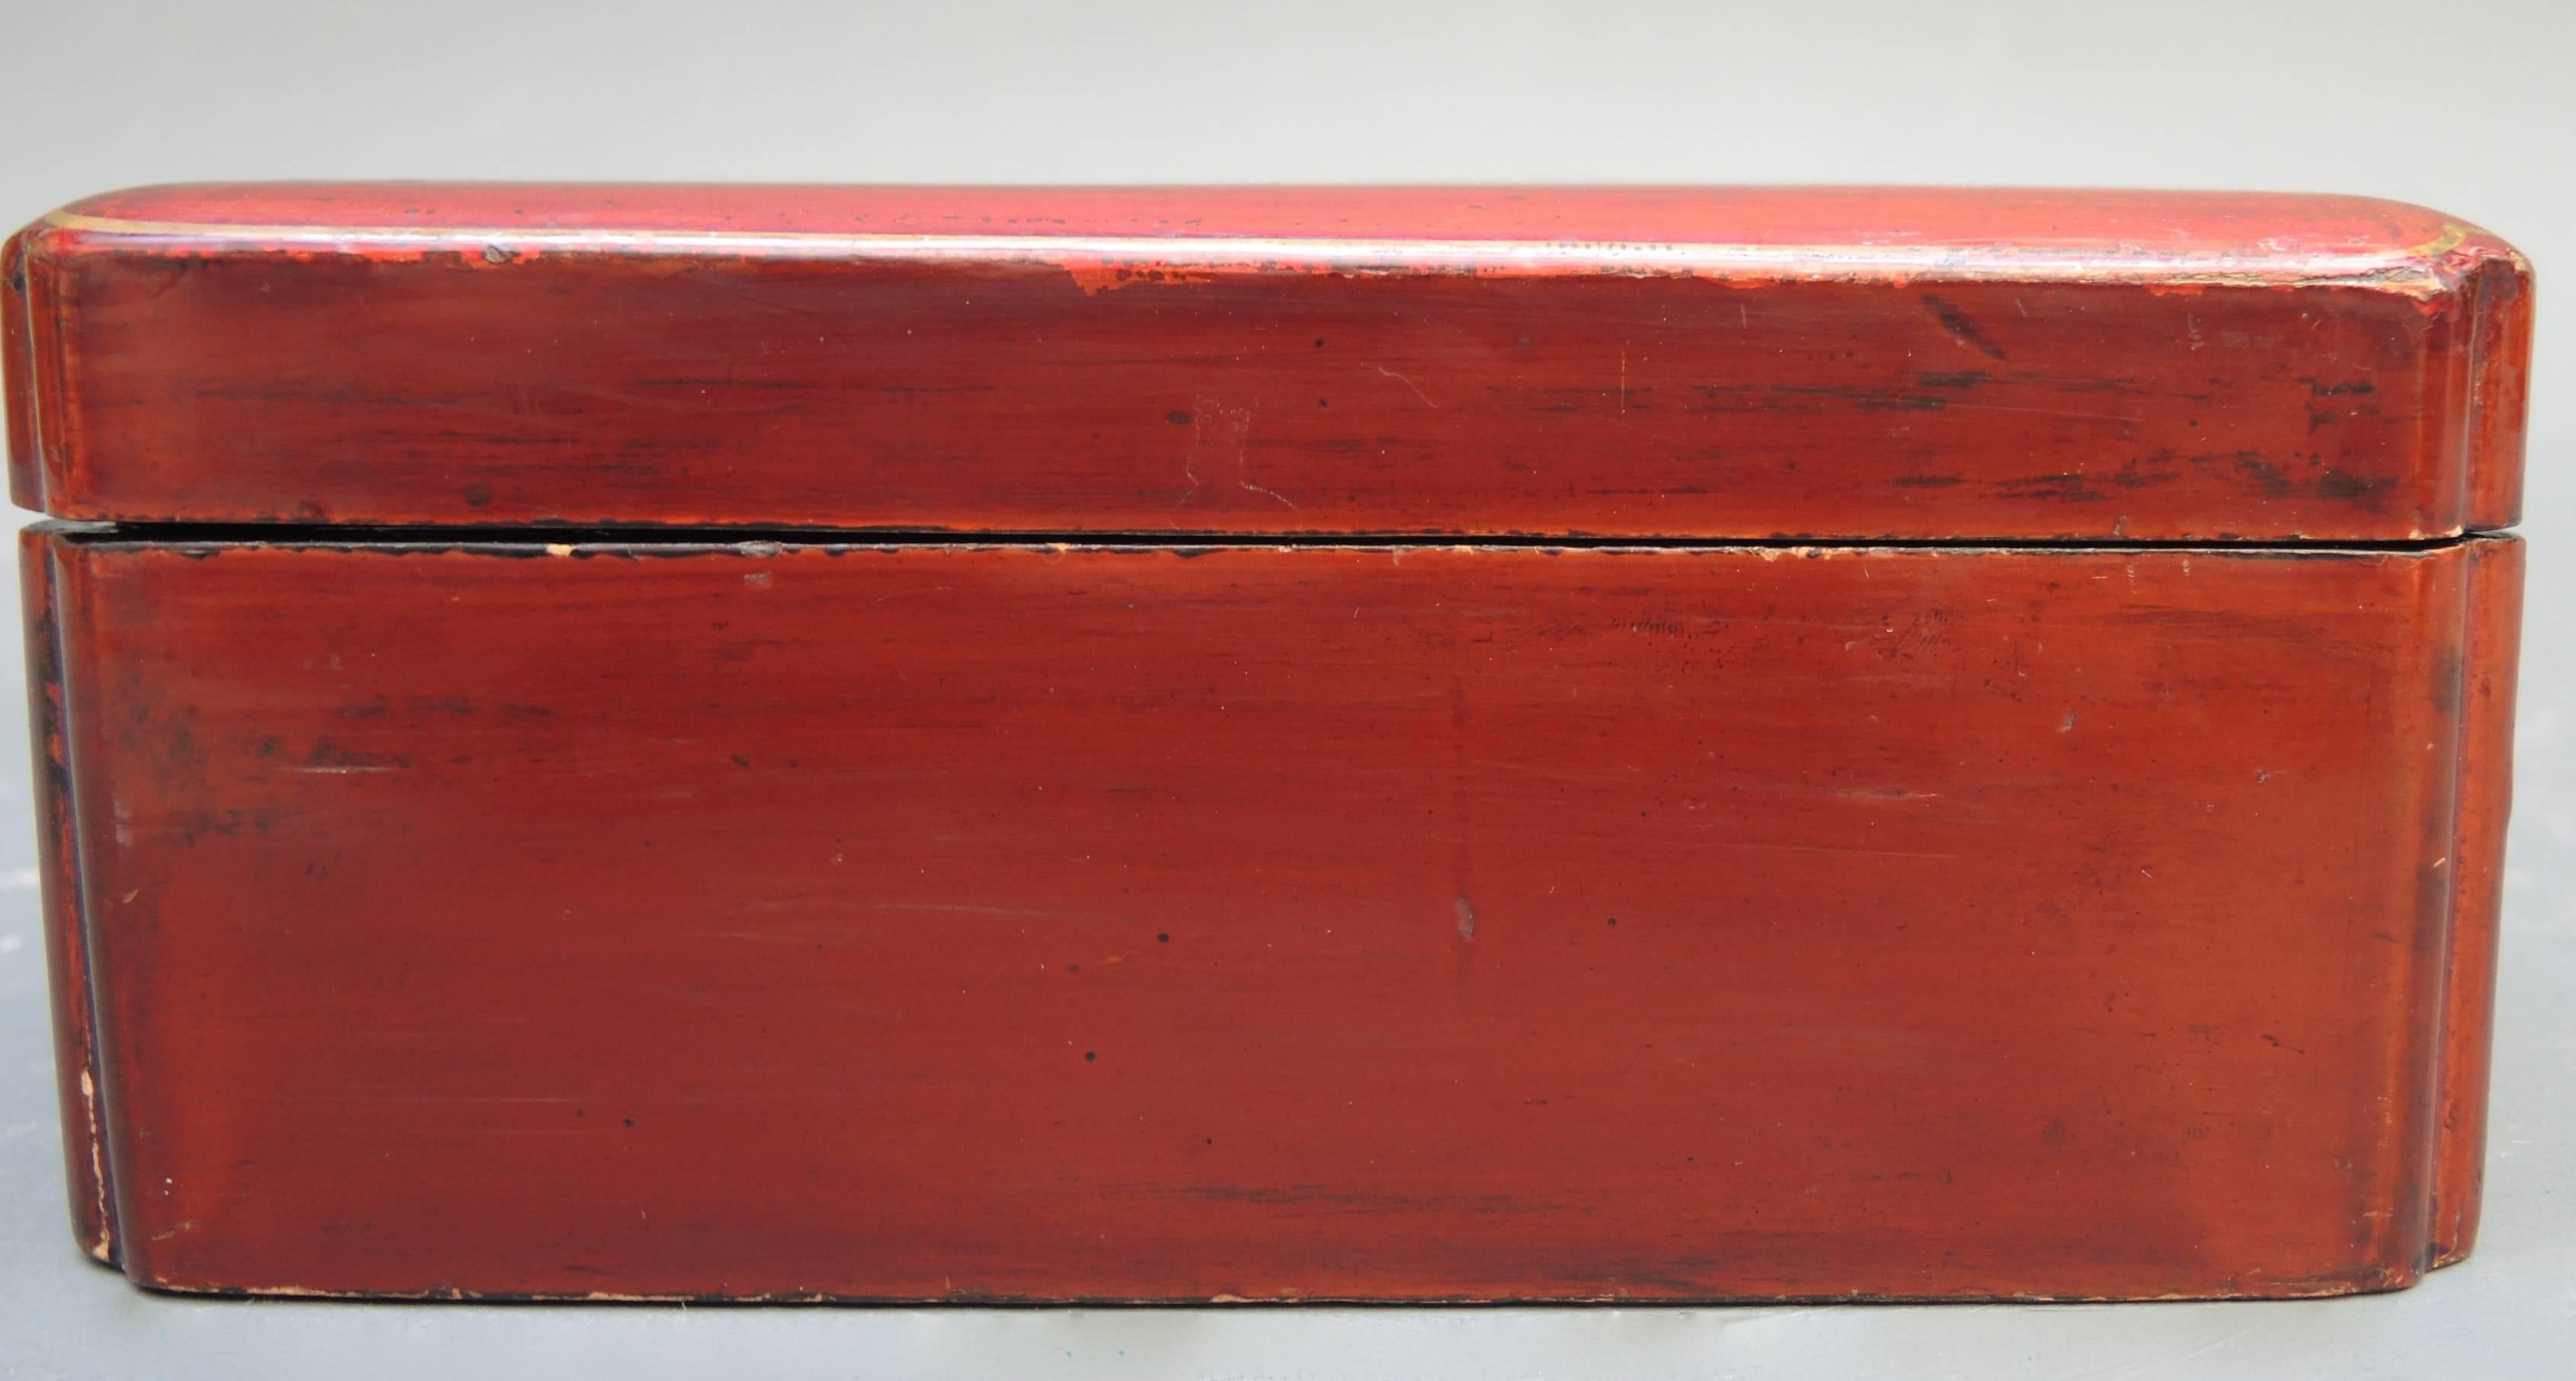 Japanese Burnt Orange Lacquered Box with Gold Painted Cranes 1